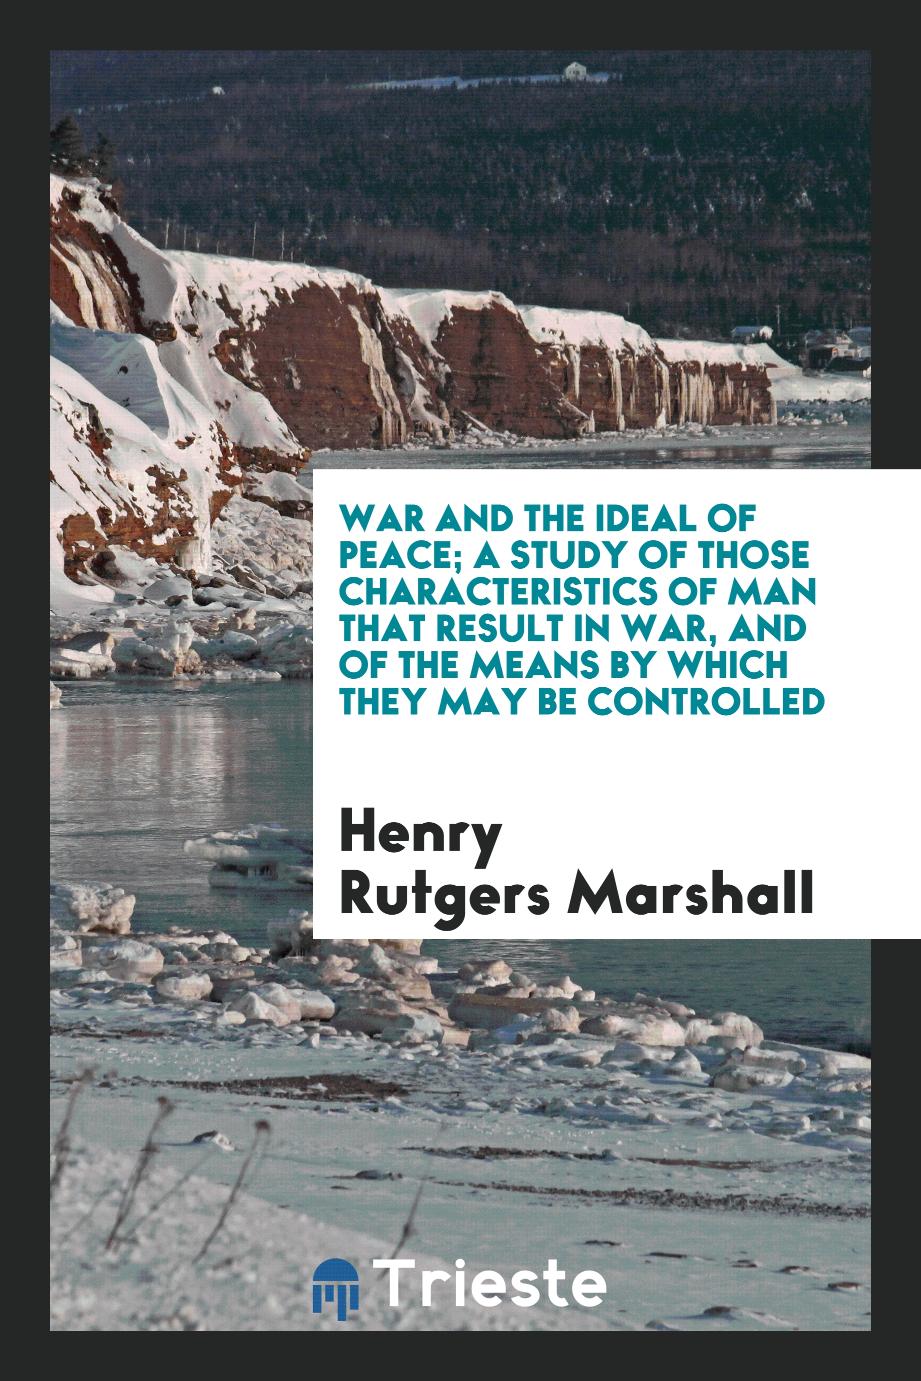 War and the ideal of peace; a study of those characteristics of man that result in war, and of the means by which they may be controlled